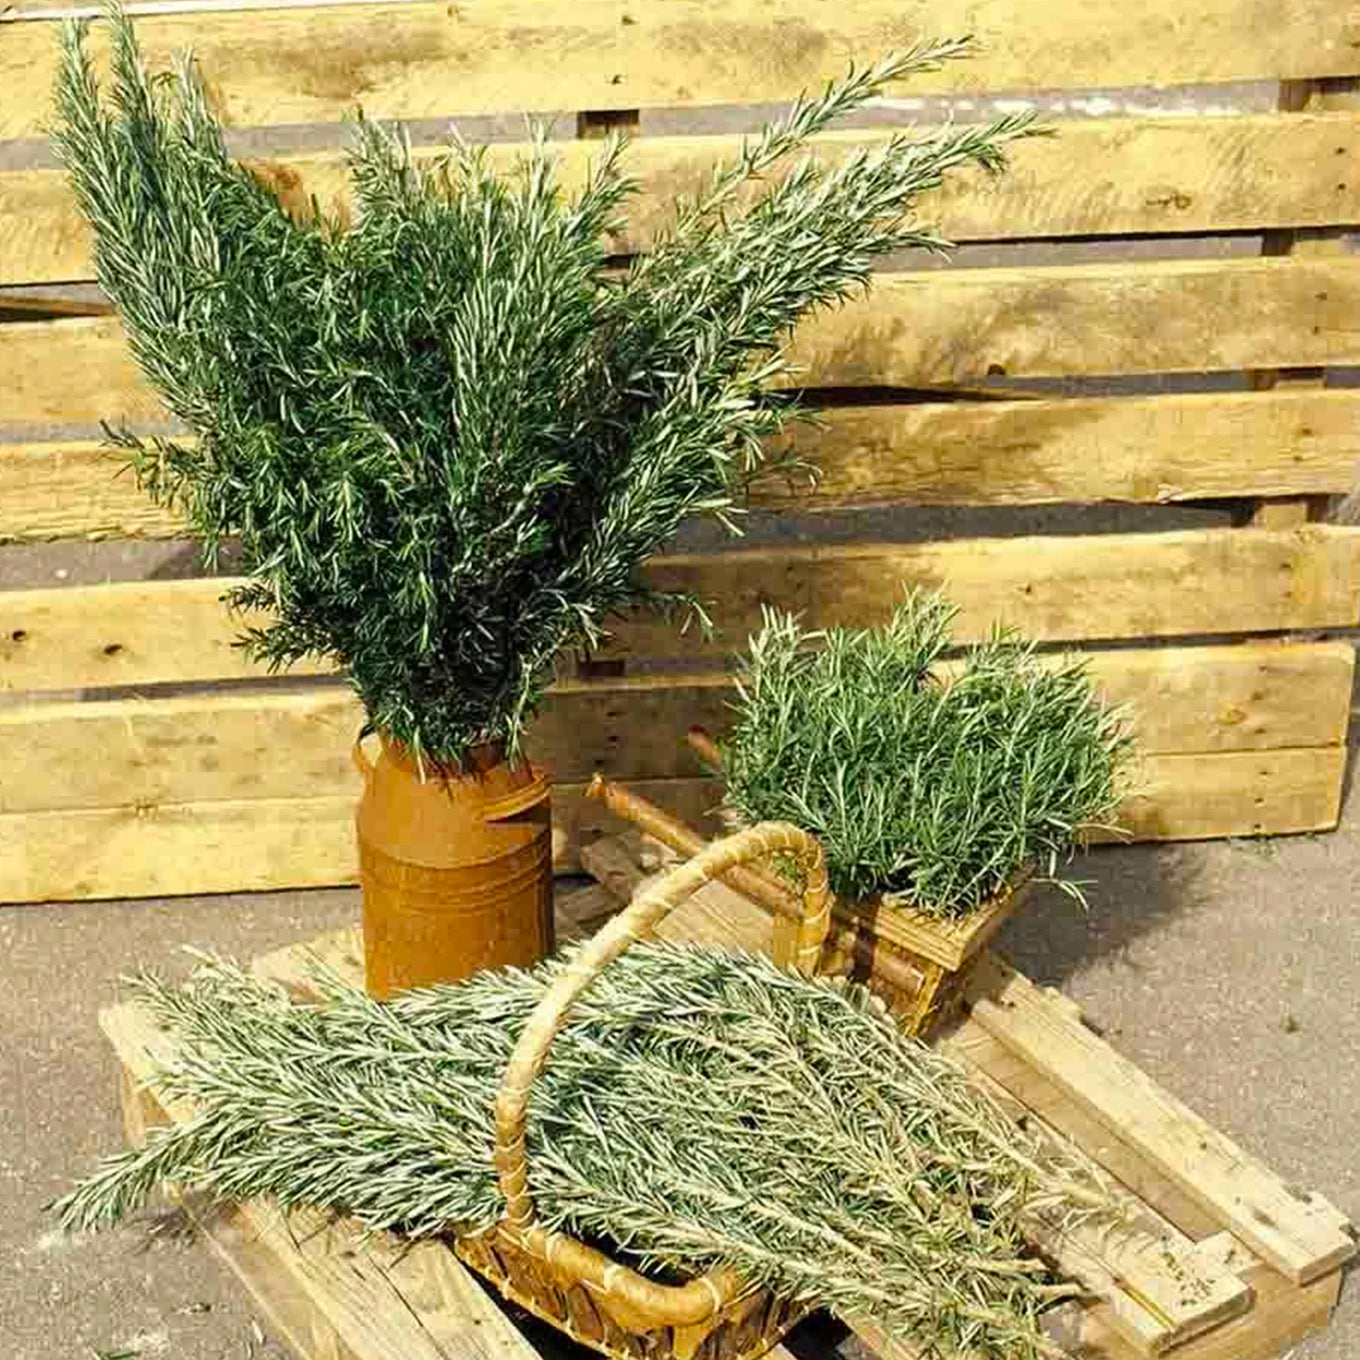 Barbecue Rosemary plant fully matured and harvested sitting in a tin on wooden pallets.